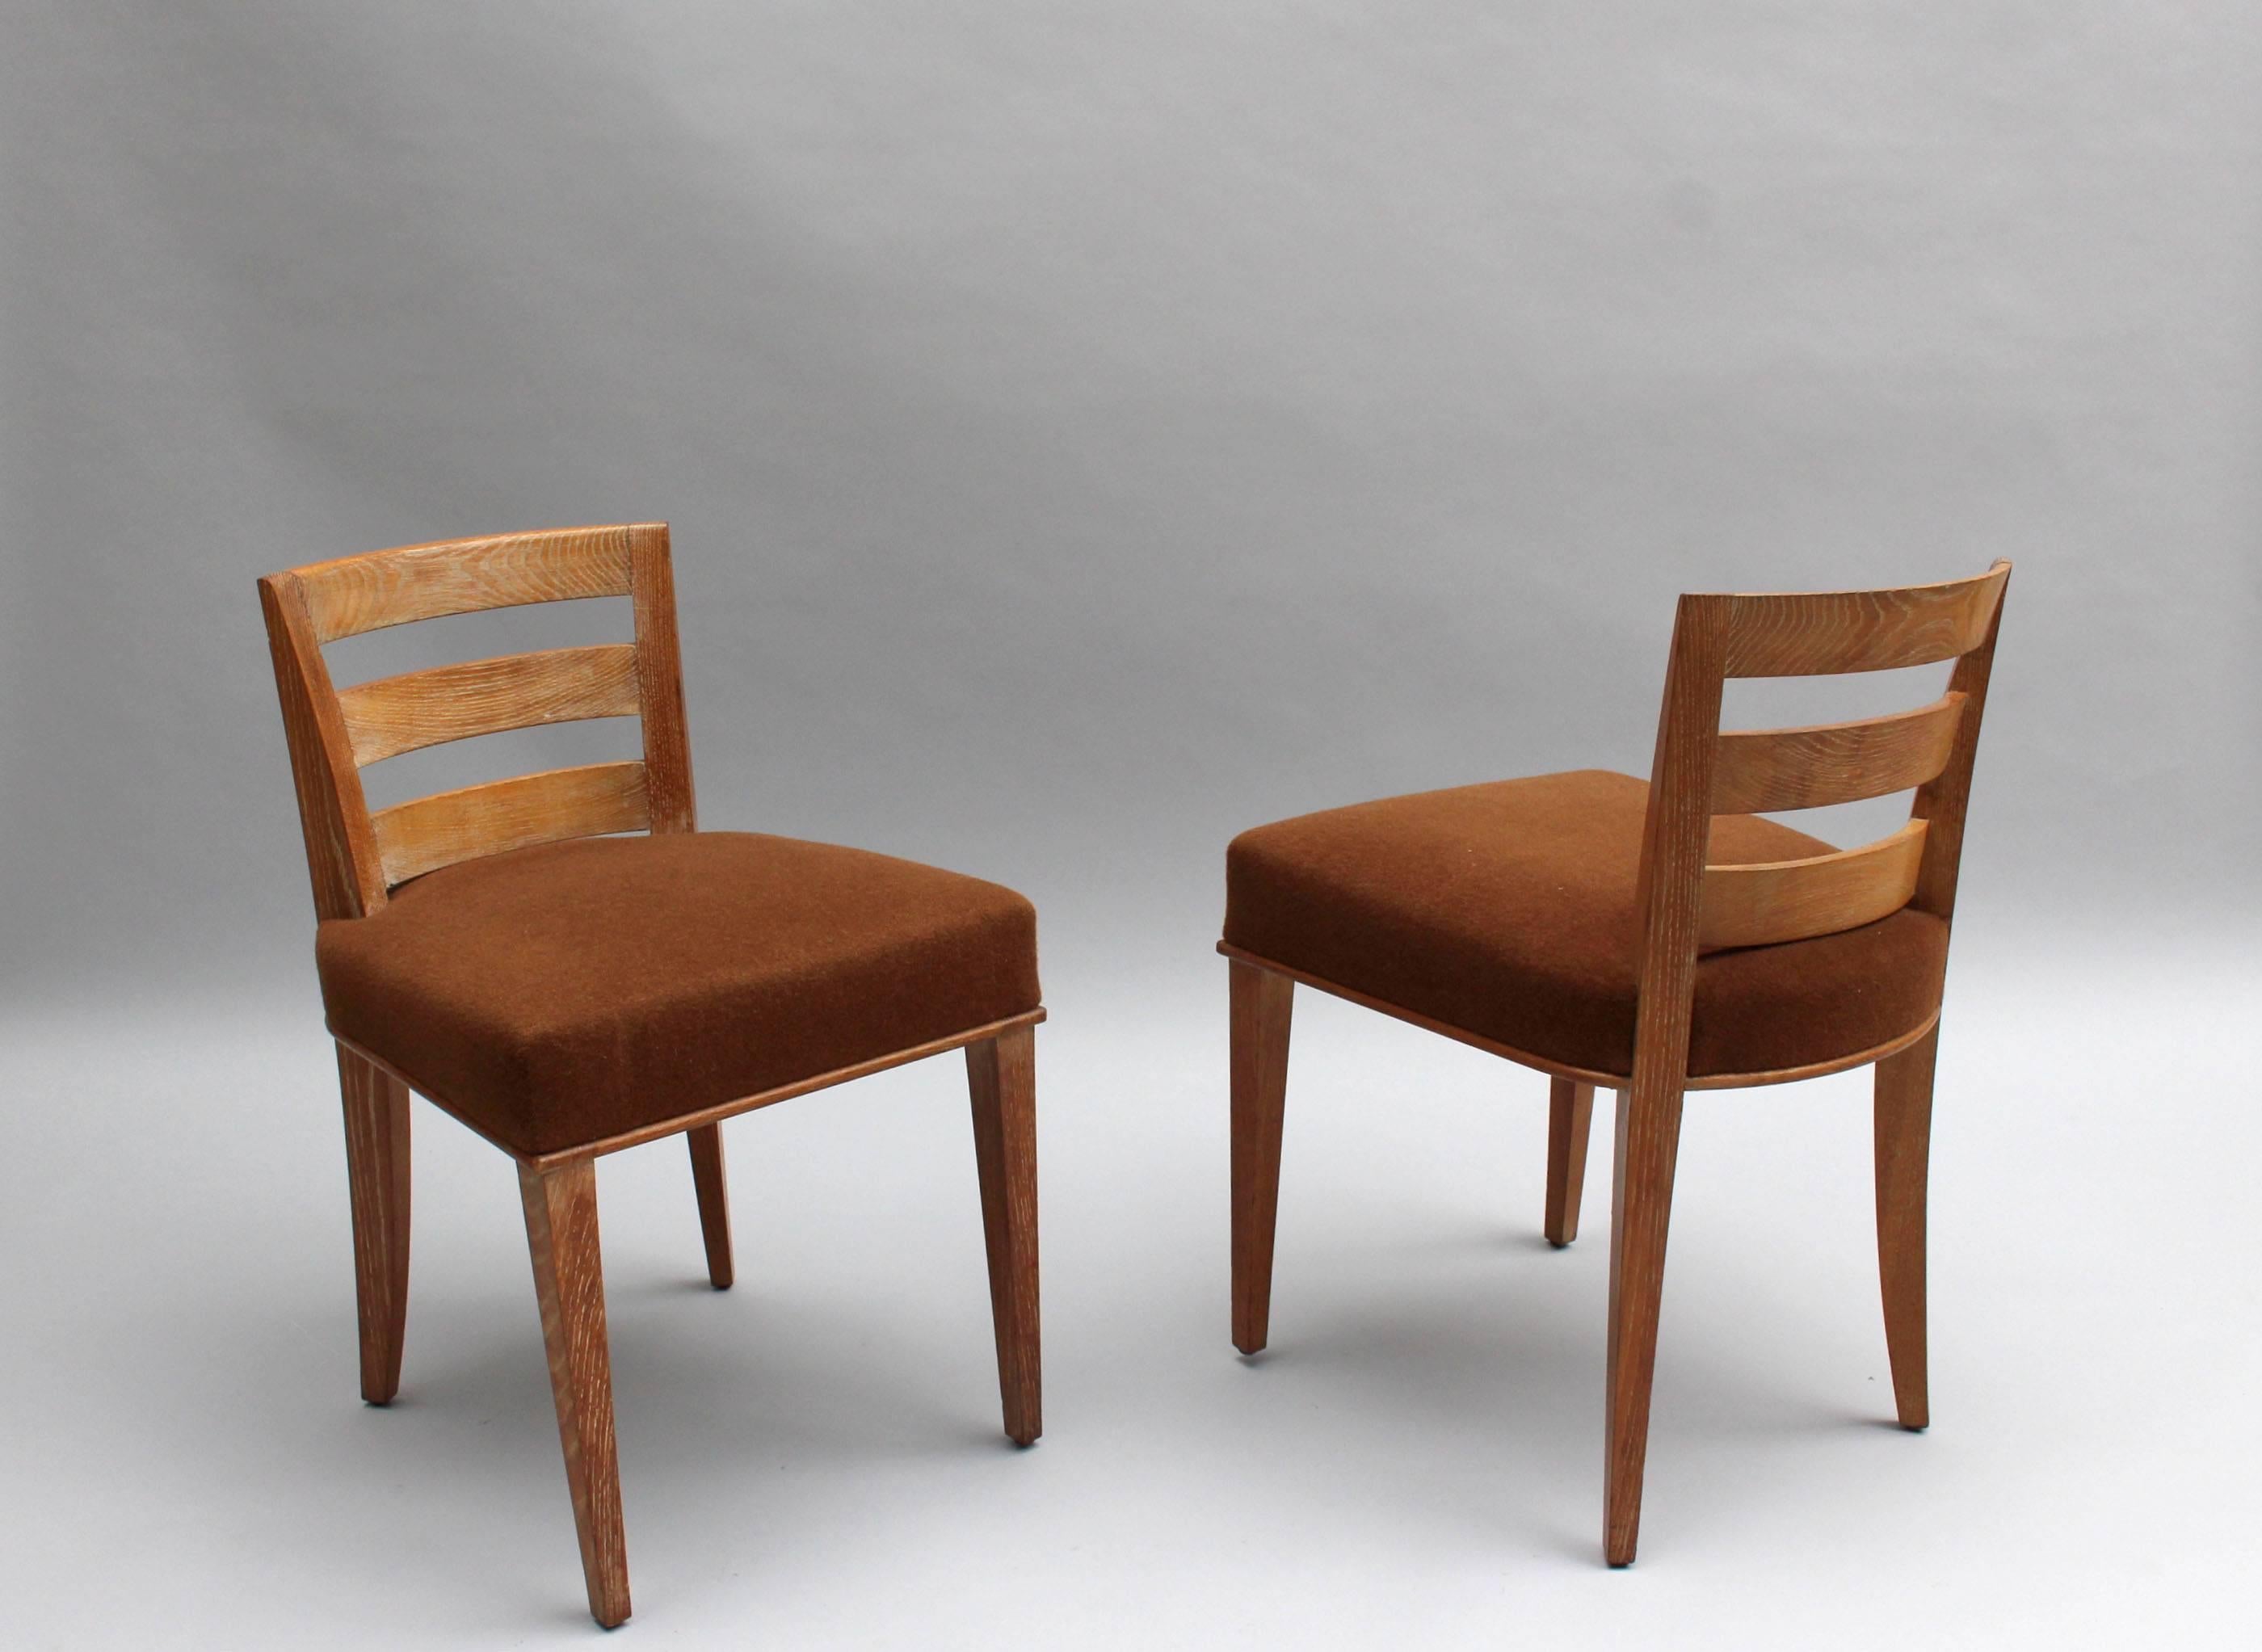 Pair of fine French Art Deco low back lime oak side chairs by André Domin and Marcel Genevrière (Dominique).
Documented in magazine 